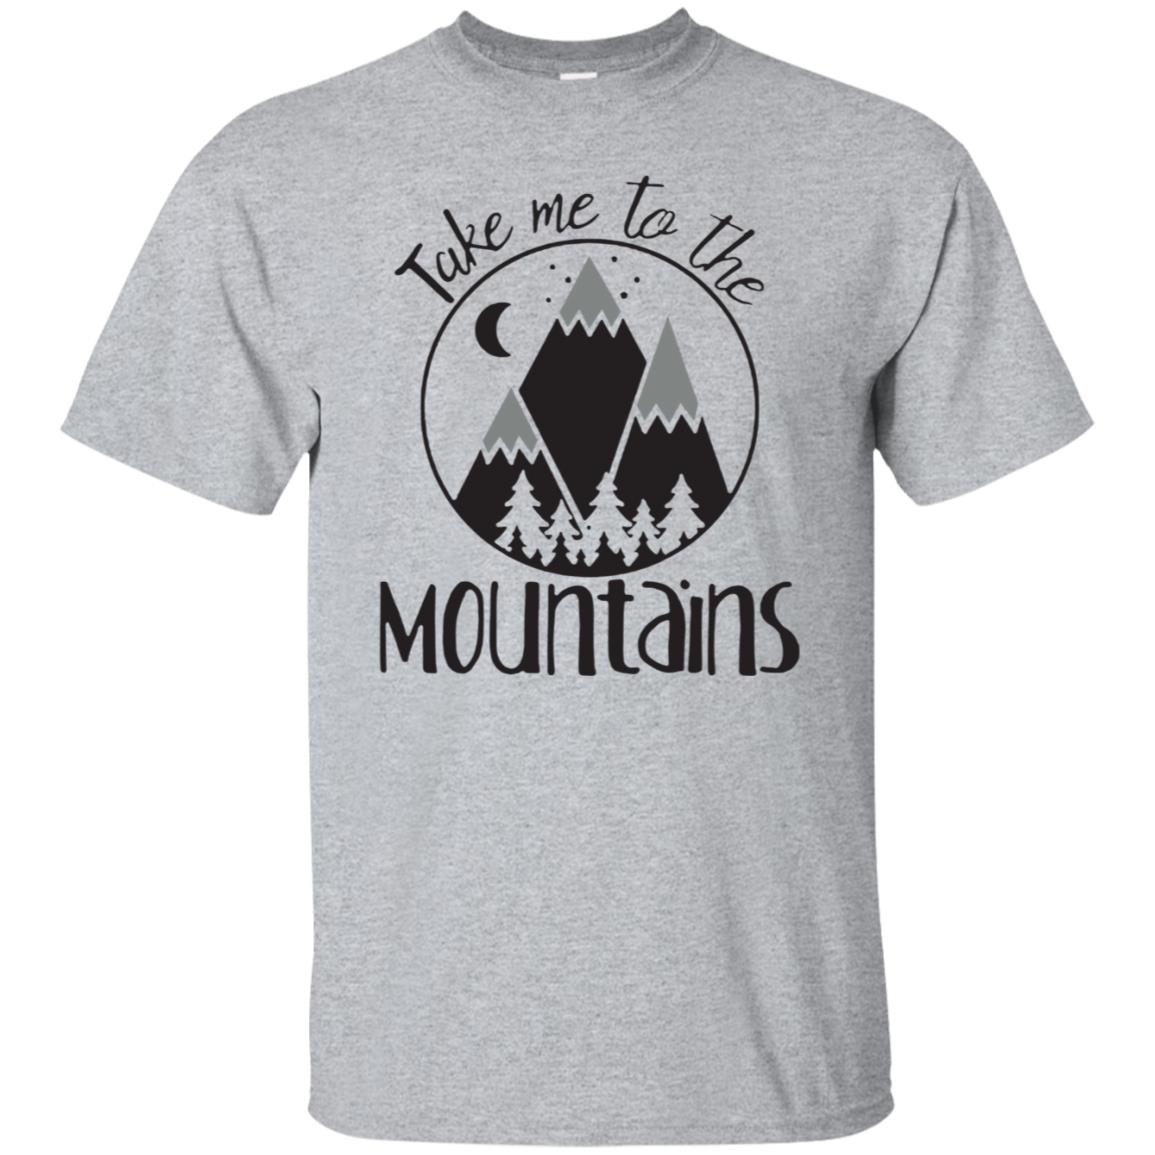 Take Me To The Mountains Shirt - 10% Off - FavorMerch